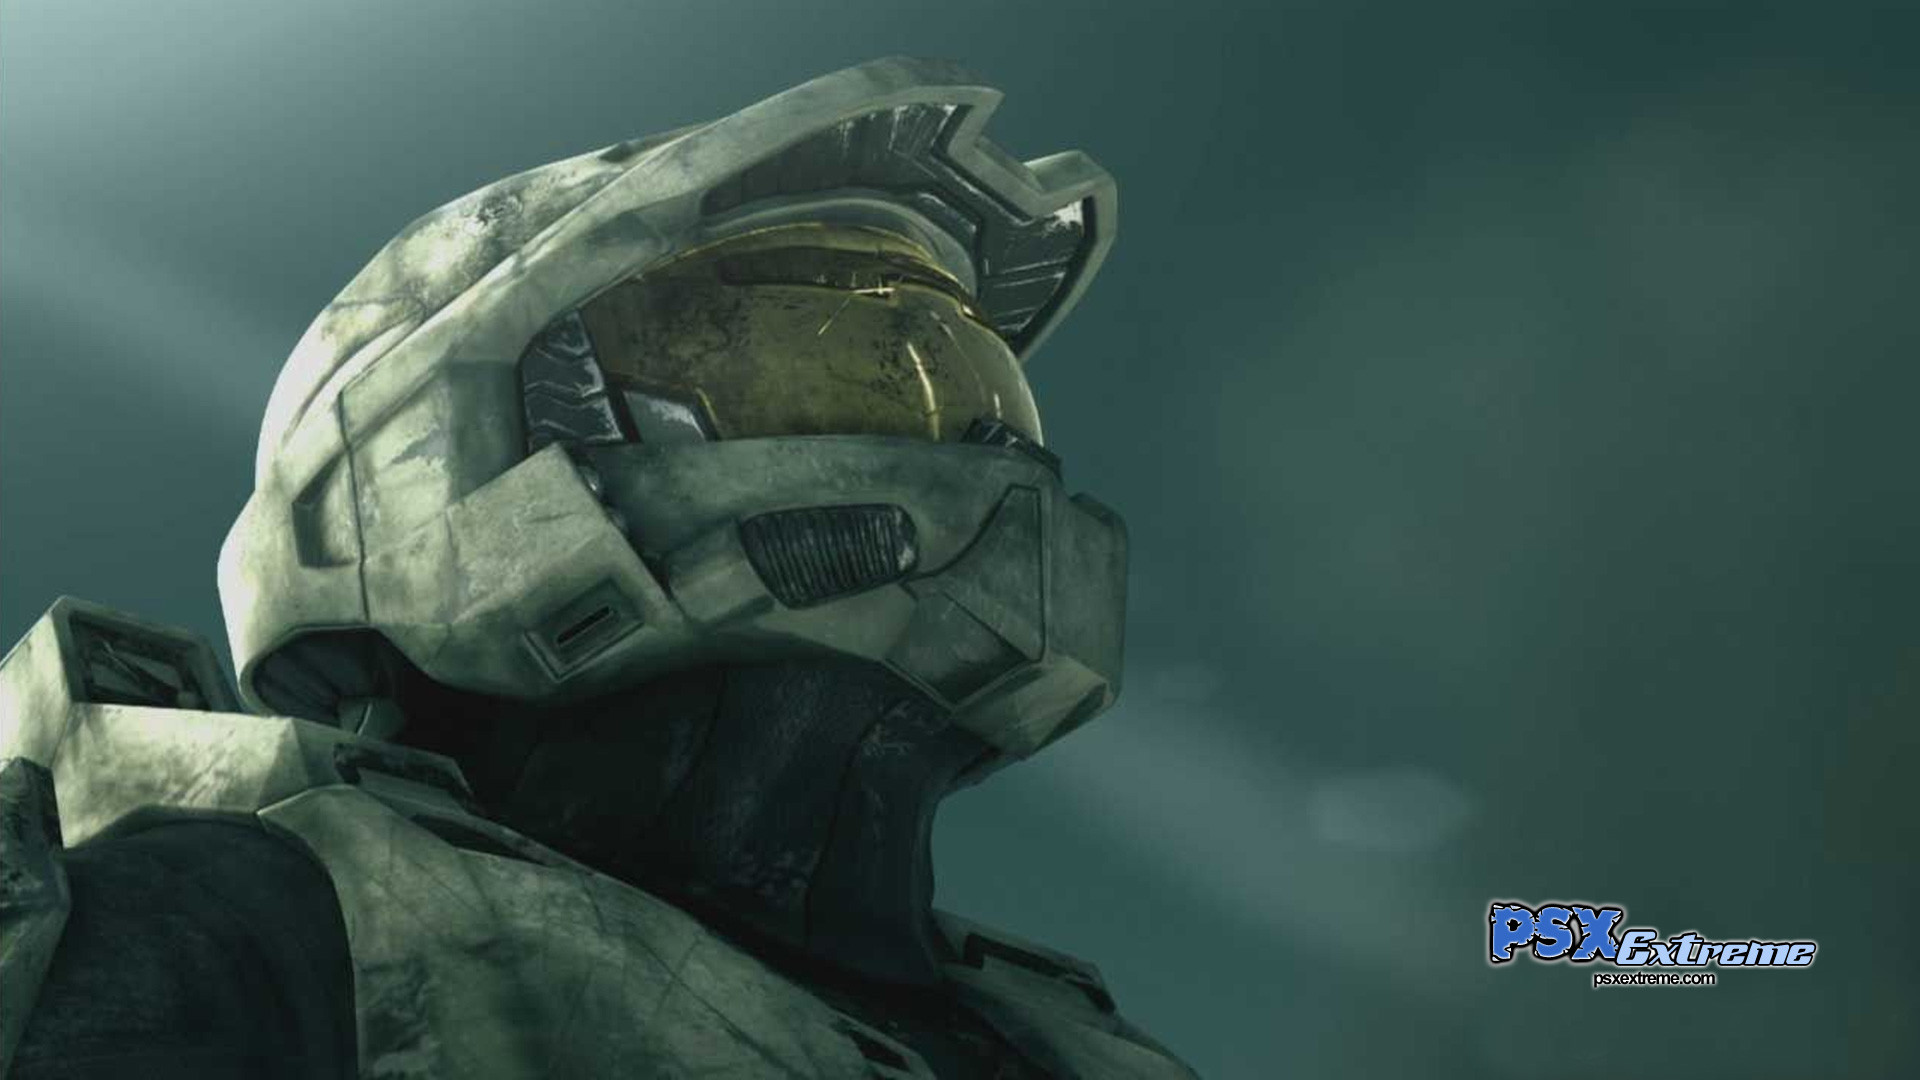 1920x1080 Halo 3 Wallpaper Photo with HD Wallpaper Resolution  px 227.91 KB  Games 1080p 3 Iphone